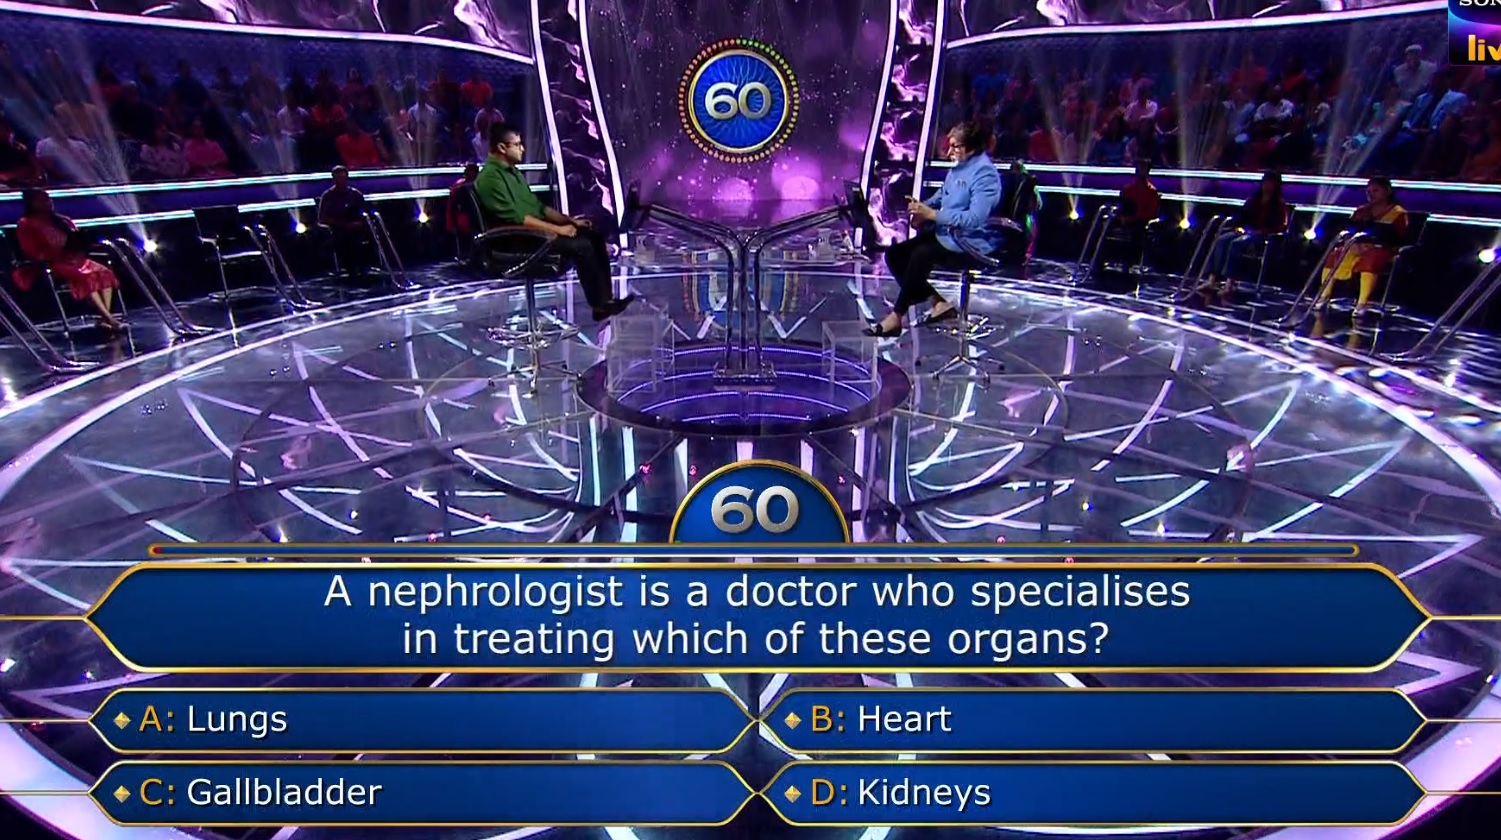 Ques : A nephrologist is a doctor who specializes in treating which of these organs?